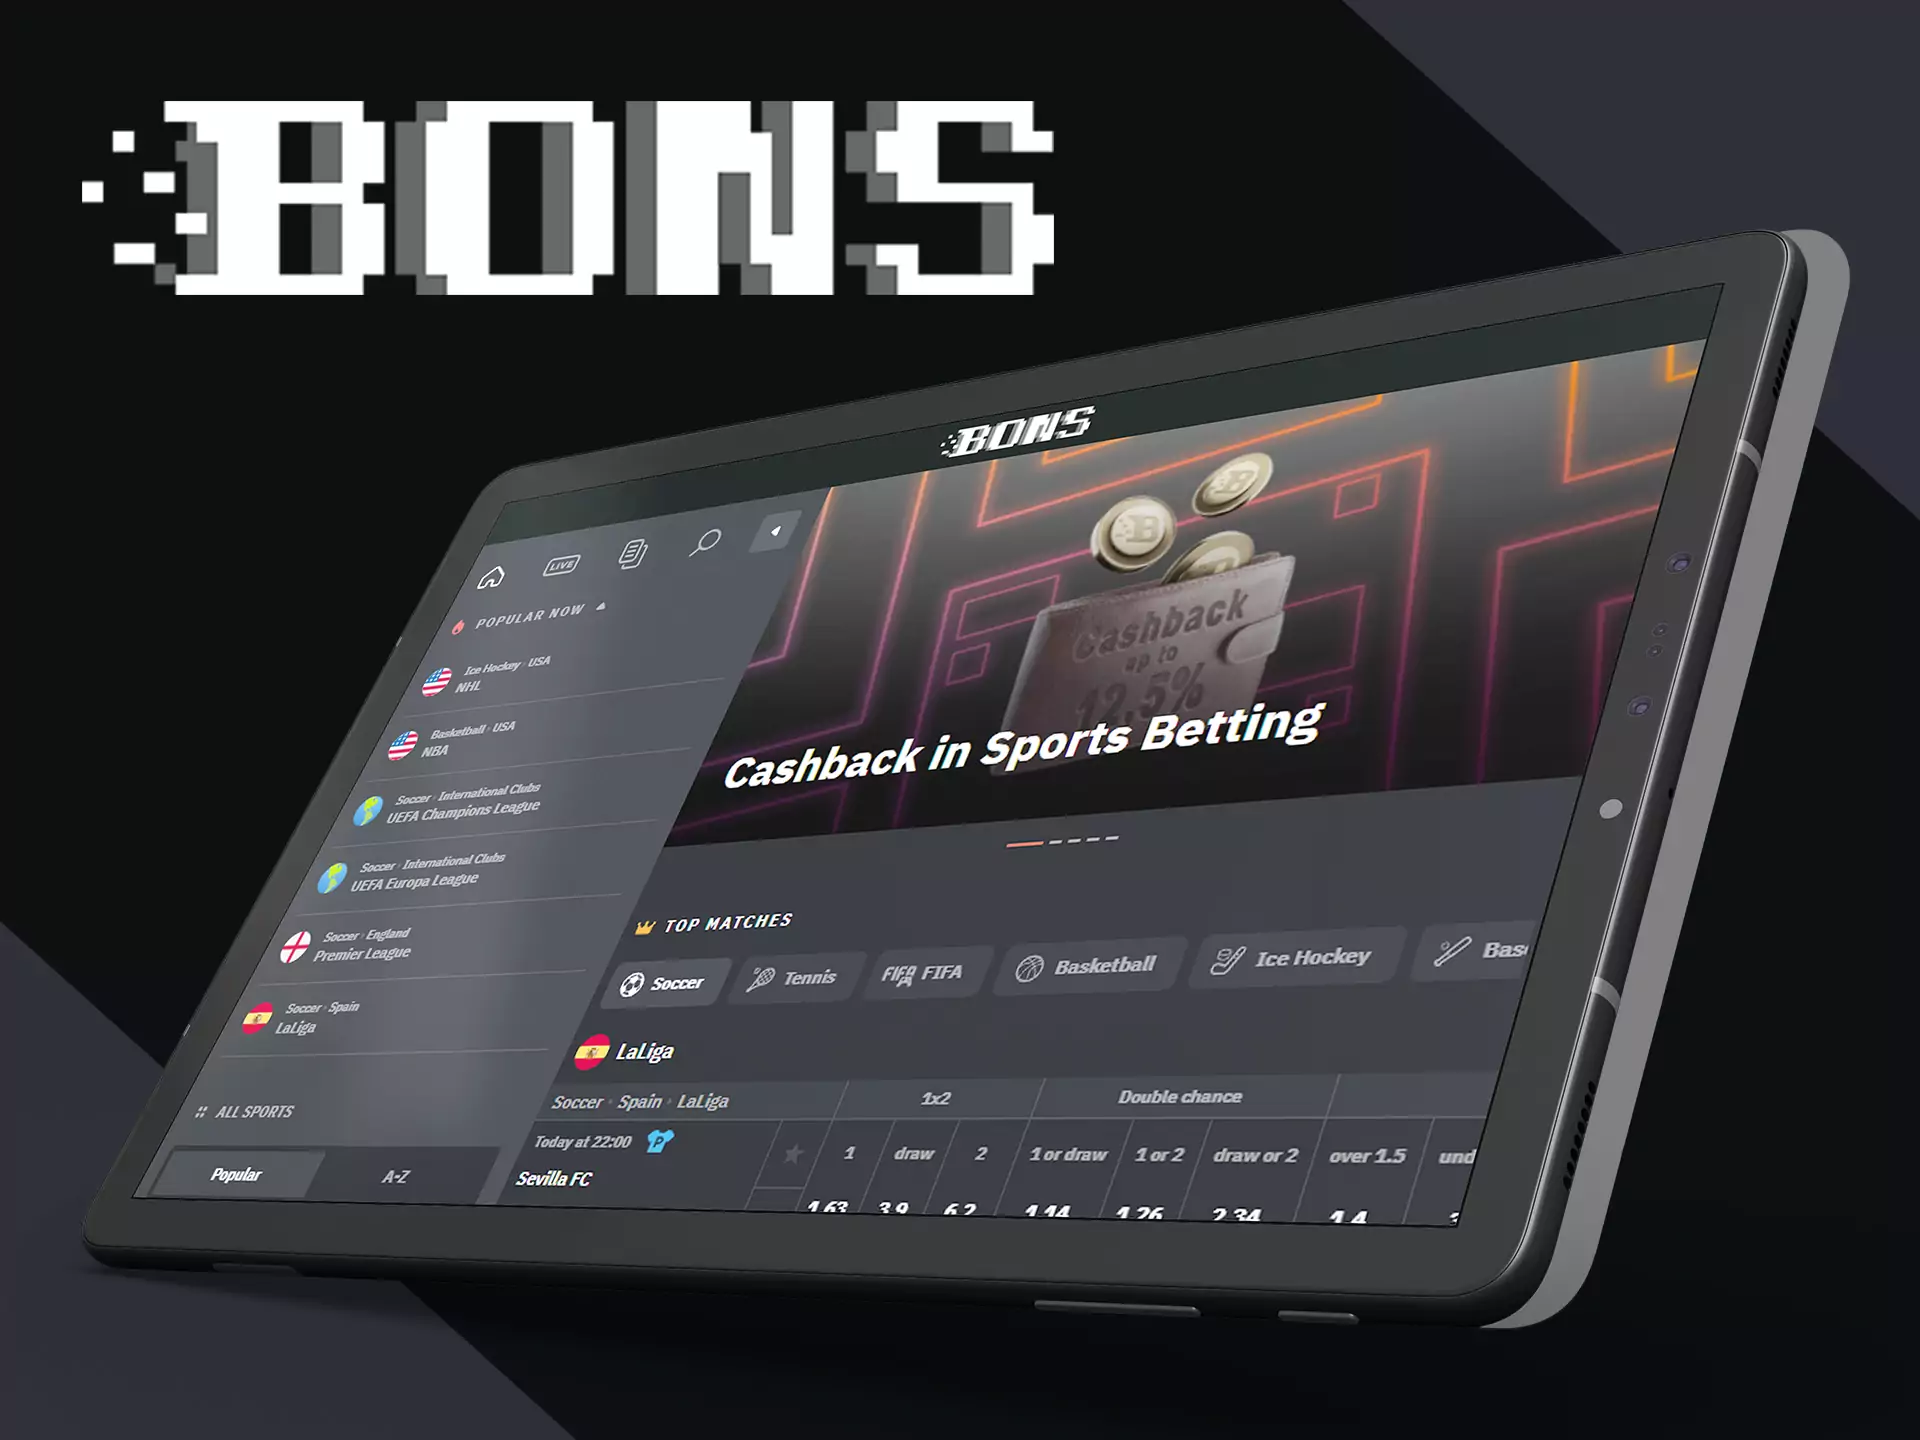 The mobile version of the site supports all the features of the Bons app.